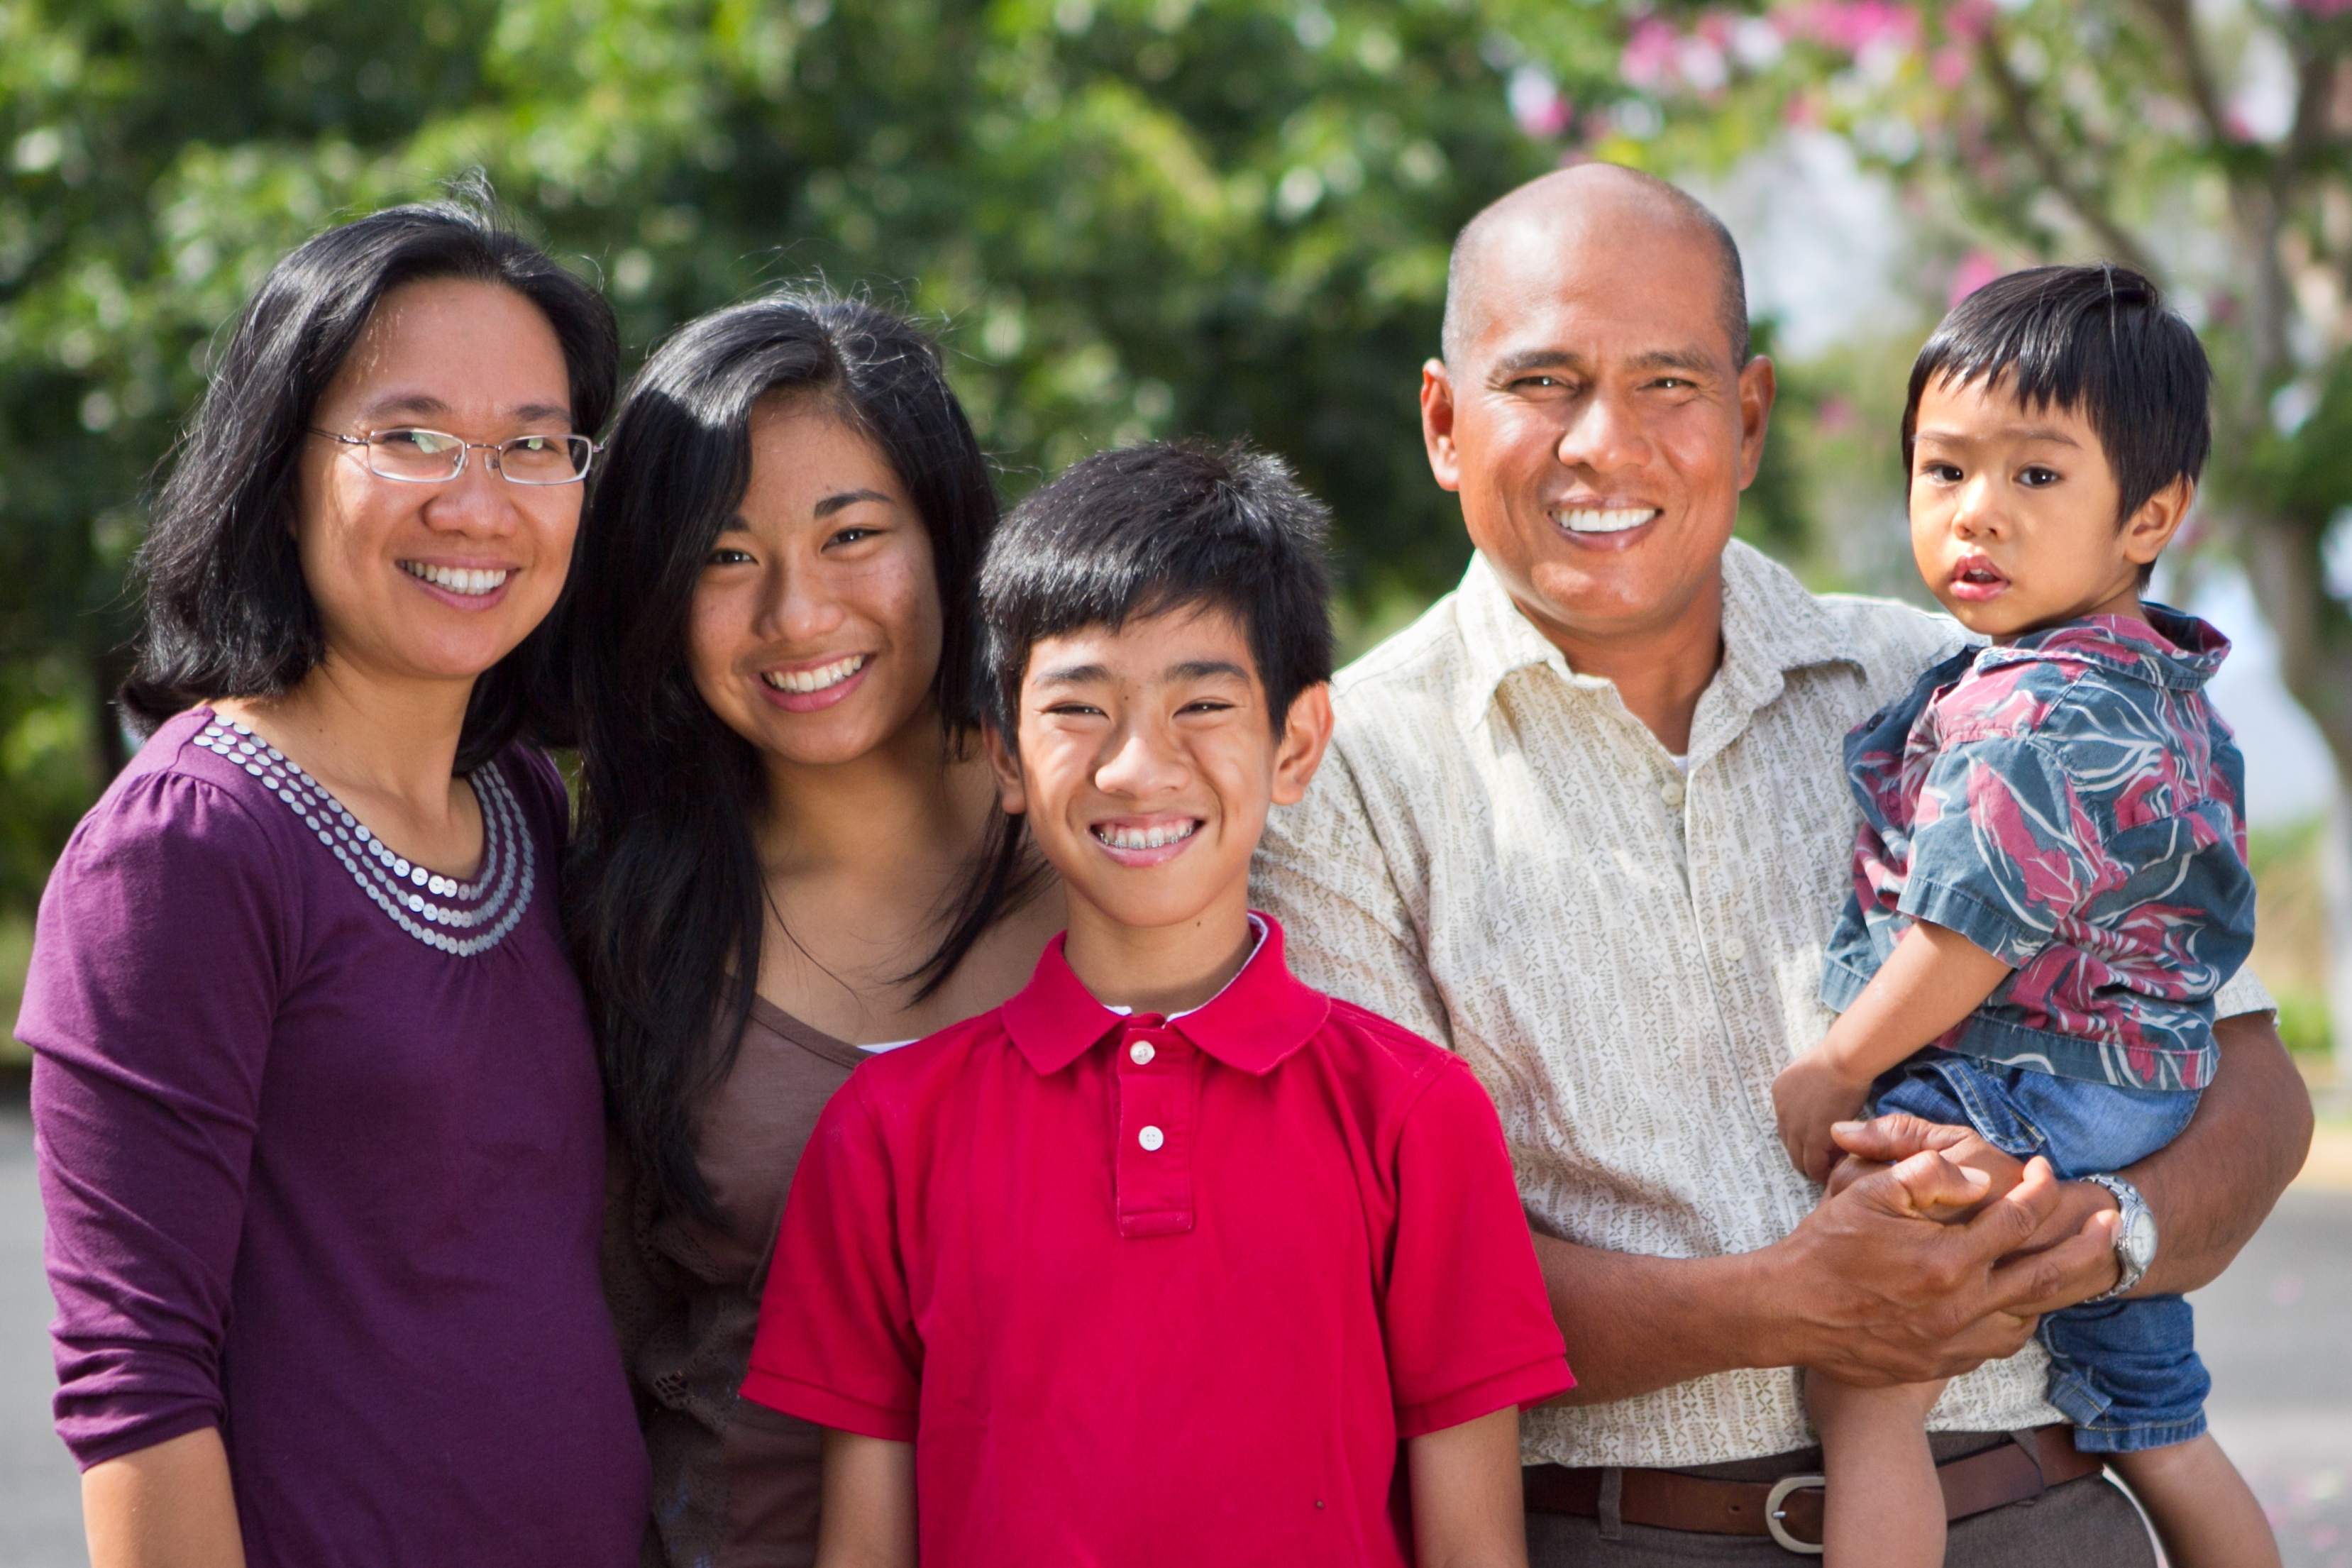 A smiling, Asian American family. [Image:  neicebird / Getty Images]